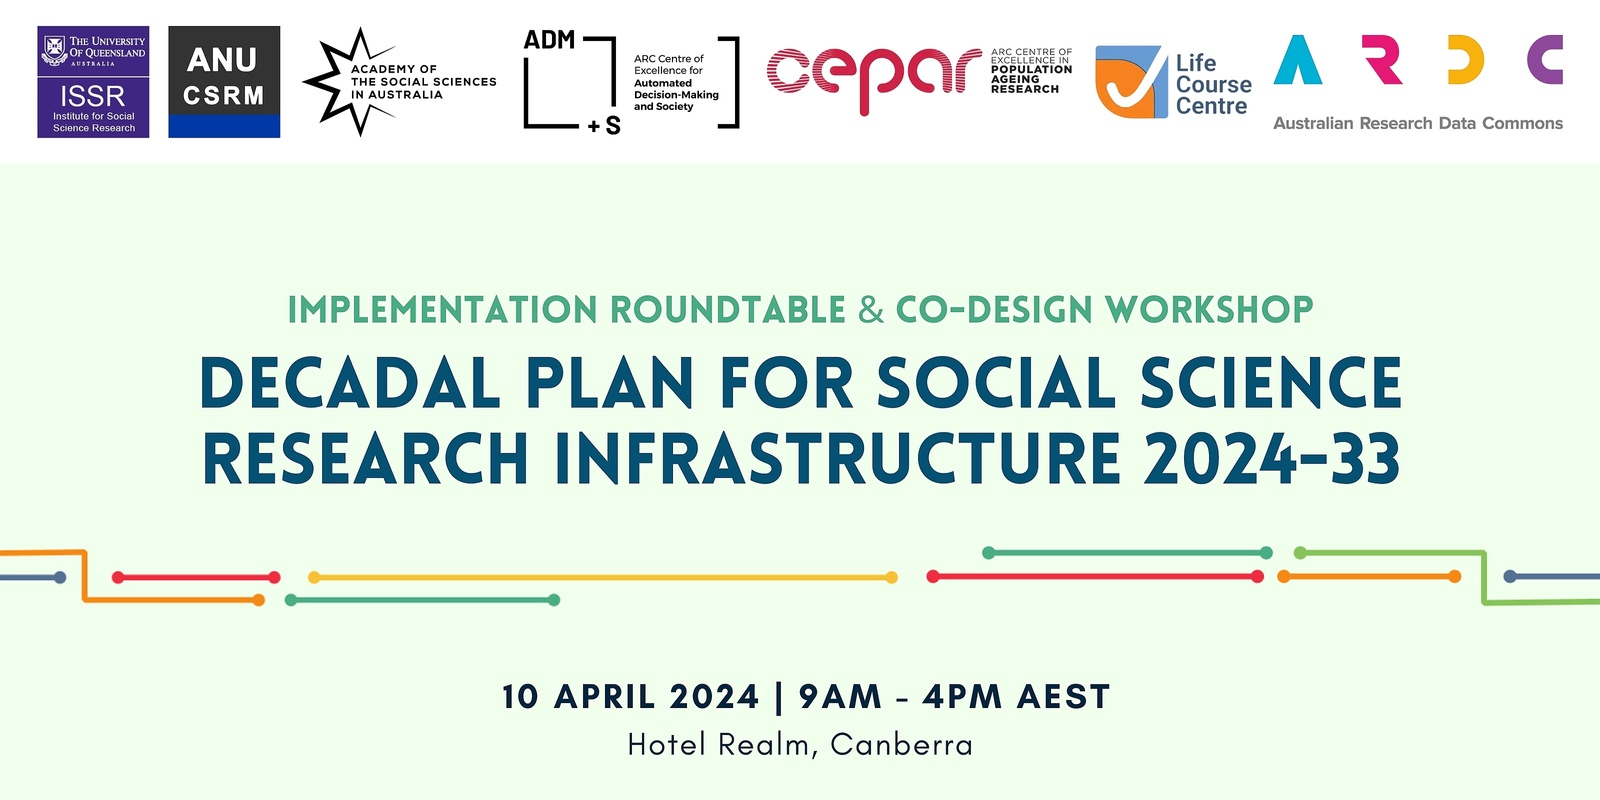 Banner image for Implementation Roundtable & Co-Design Workshop | Decadal Plan for Social Science Research Infrastructure 2024-33